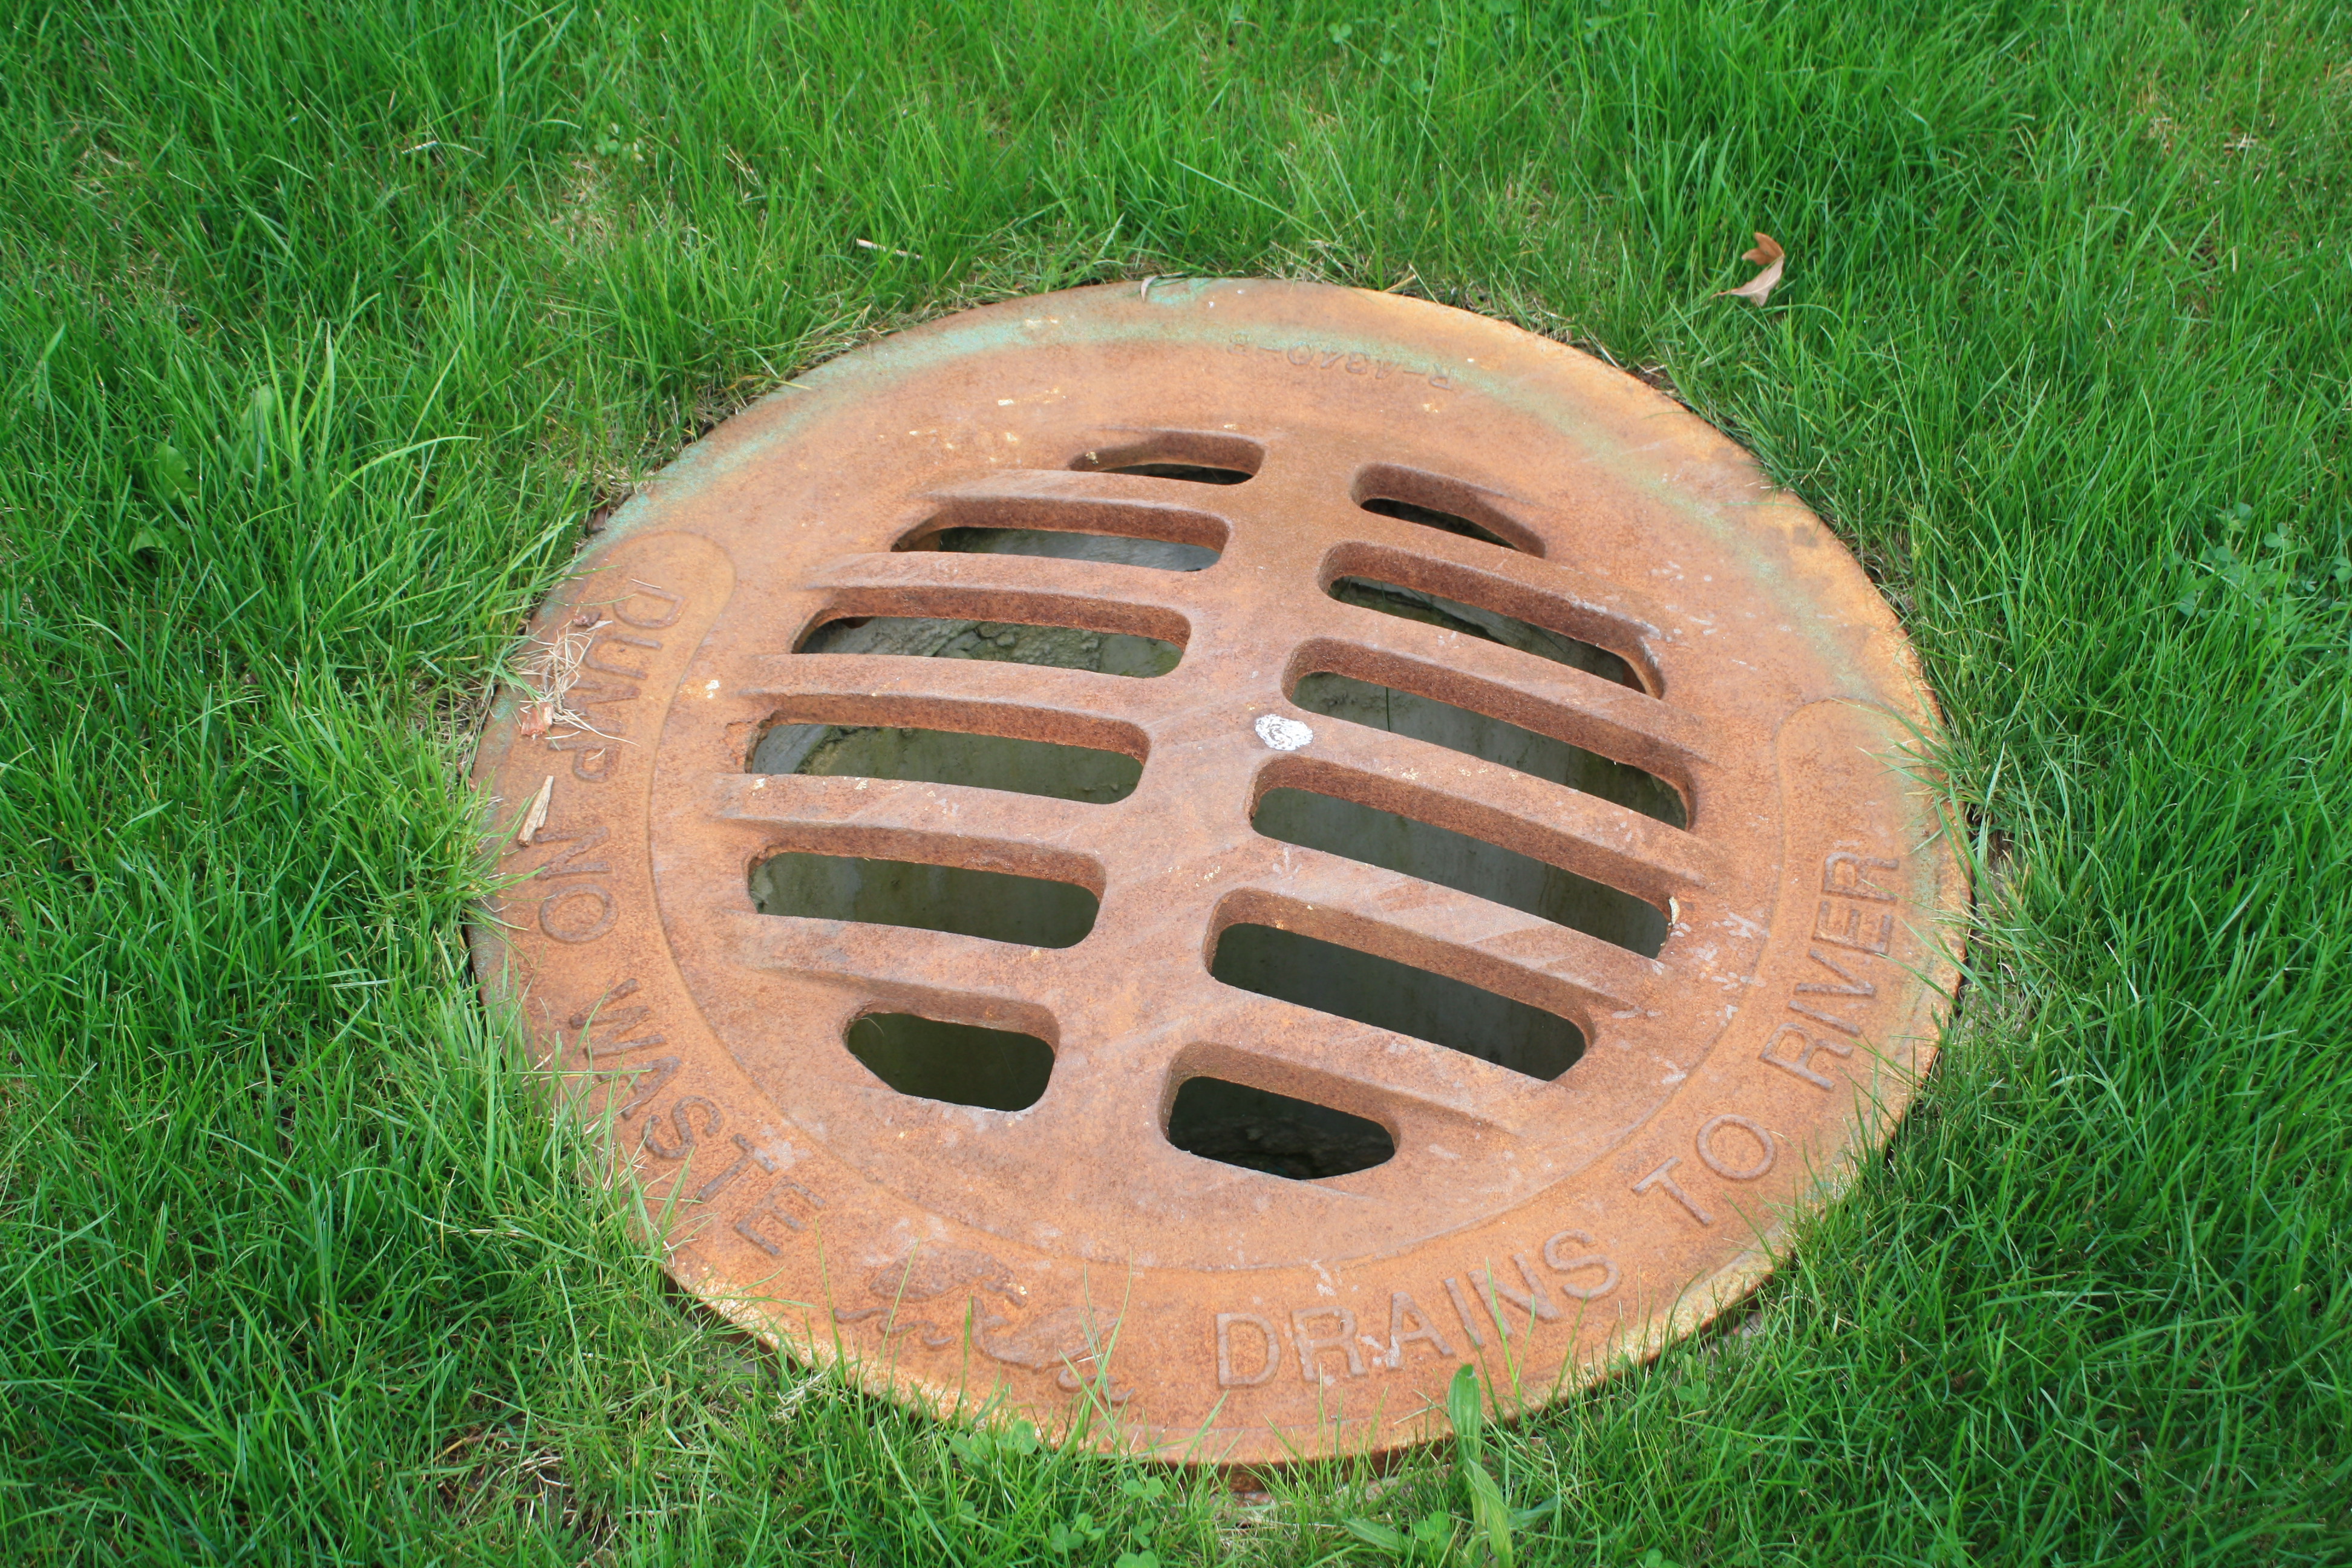 Storm Sewer